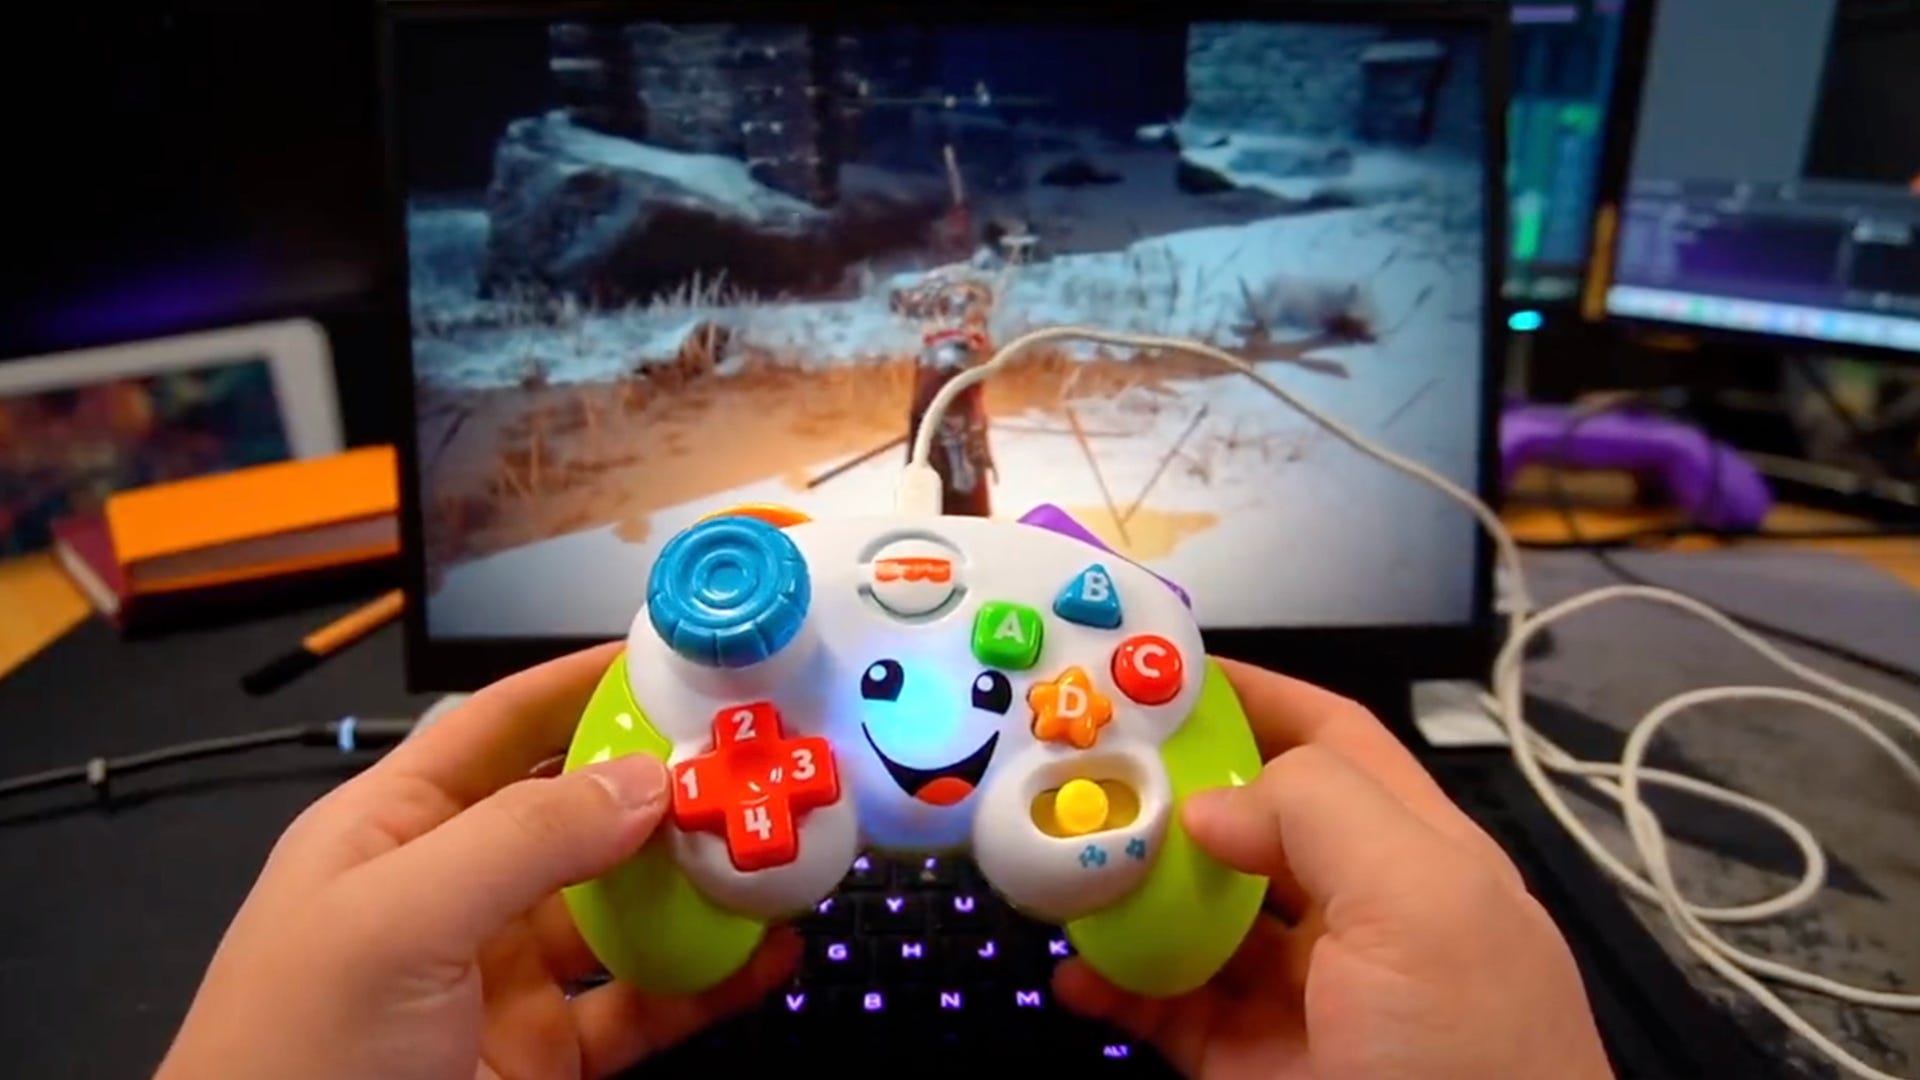 Check Out This Working Fisher-Price Xbox Controller Mod